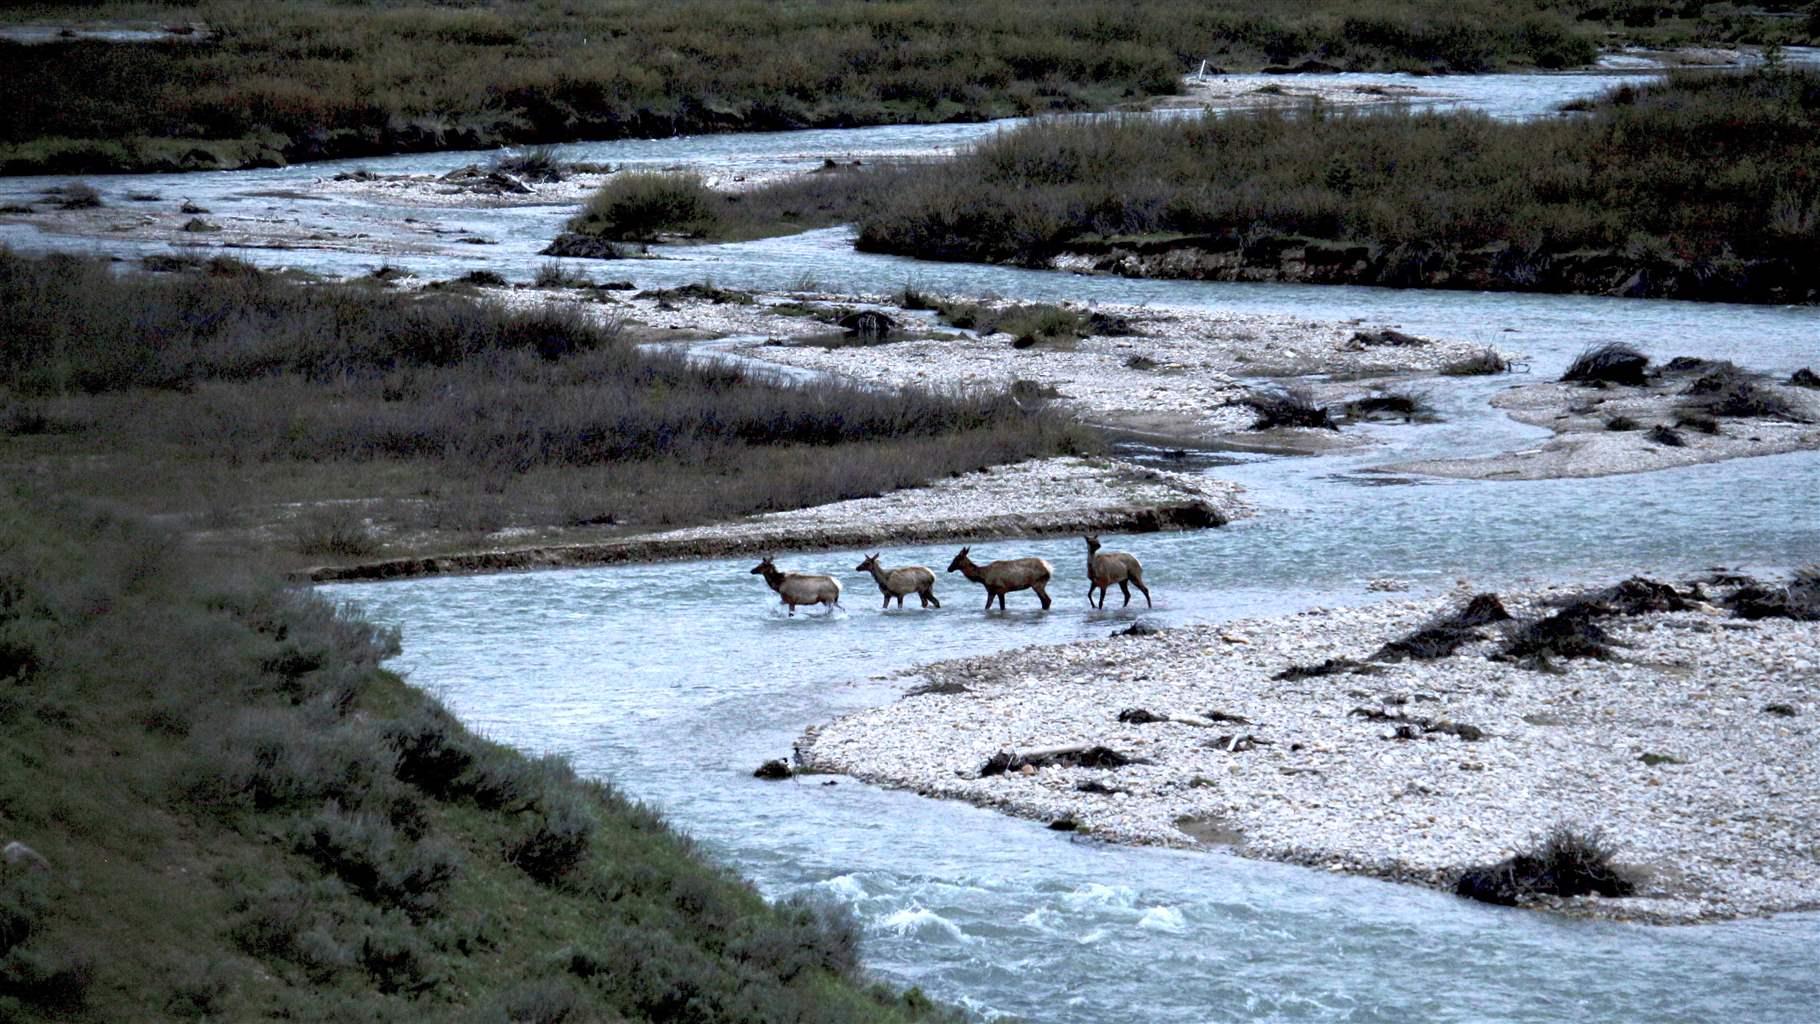 Four elk crossing Granite Creek in the Bridger-Teton National Forest. Wyoming’s landscapes support some of the largest elk herds in the world.